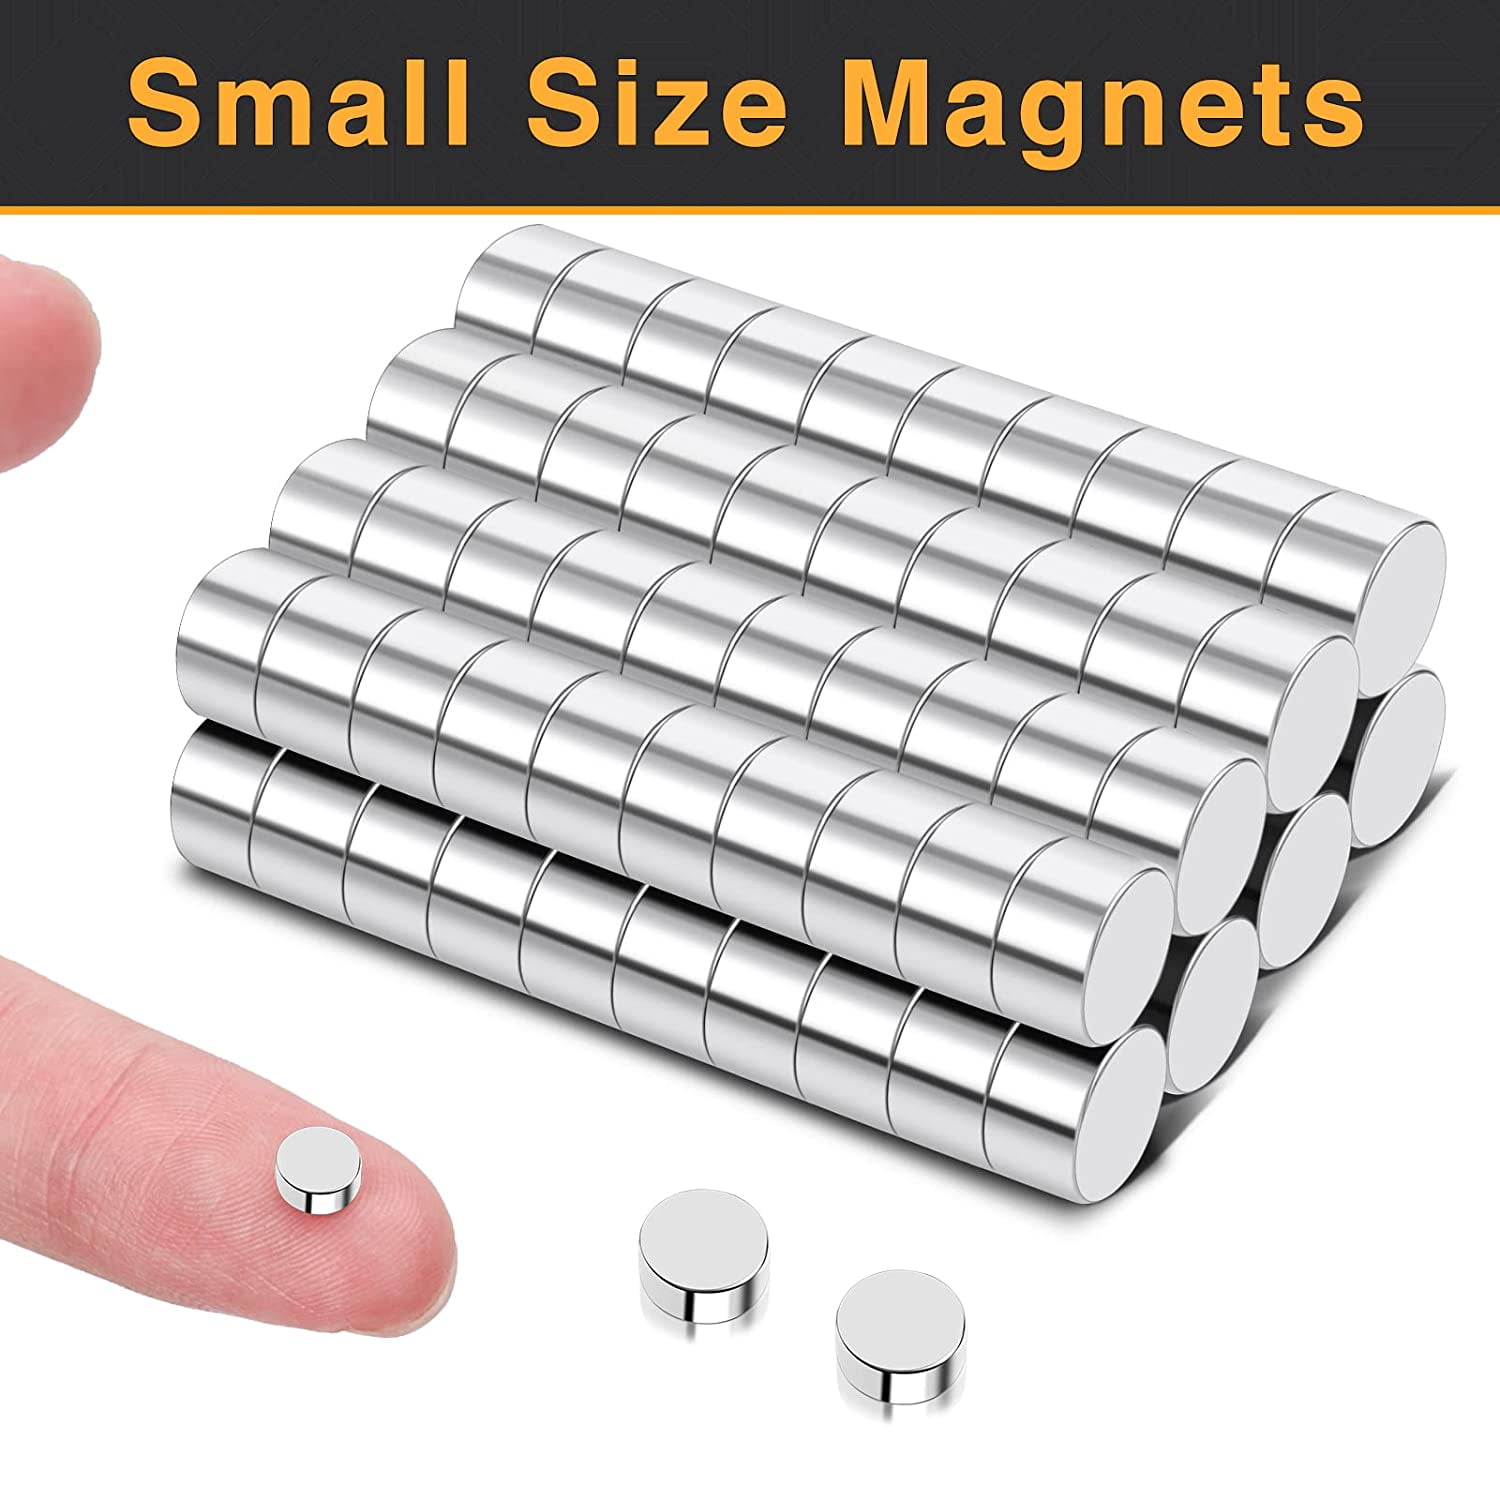 DIYMAG 3MM-Mix 100 Piece Refrigerator Magnets for Office, Hobbies, Crafts and Science, Small Round Disc Magnets, Push Pin Magnet